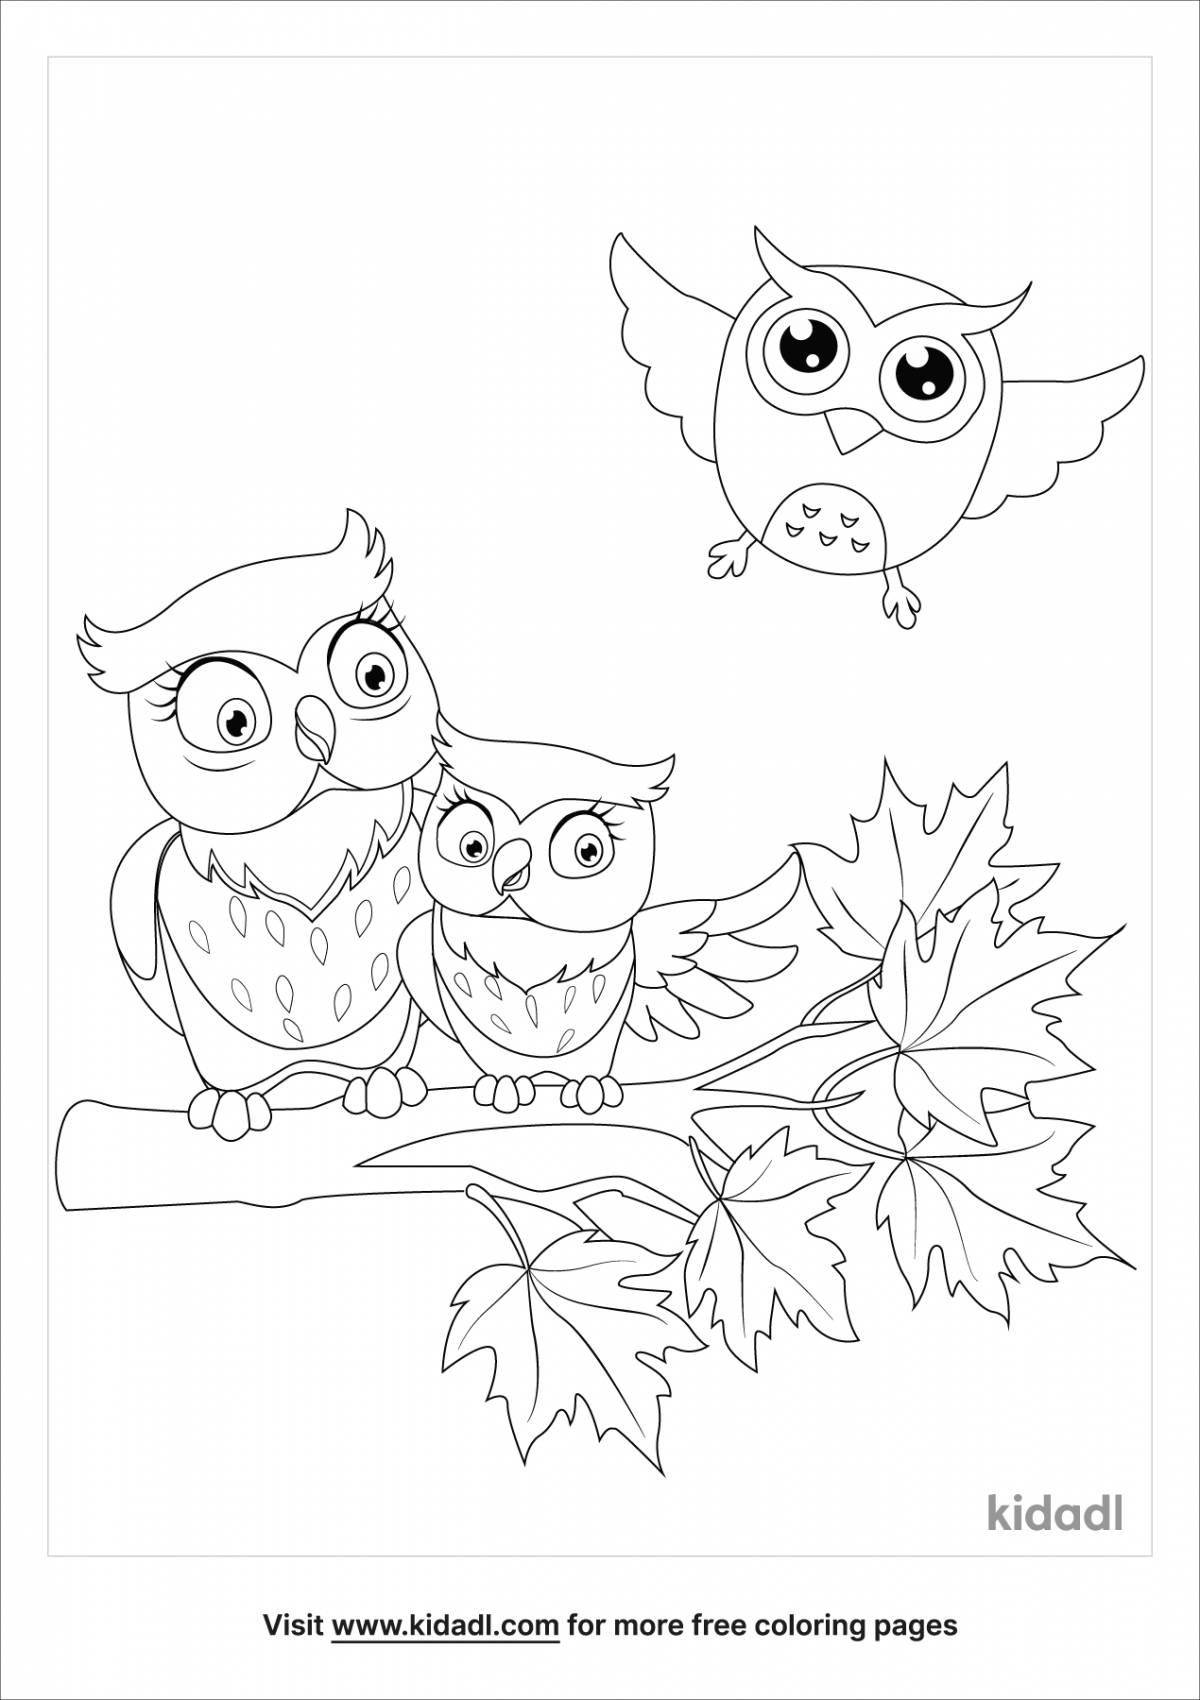 Playful owl coloring book for 6-7 year olds